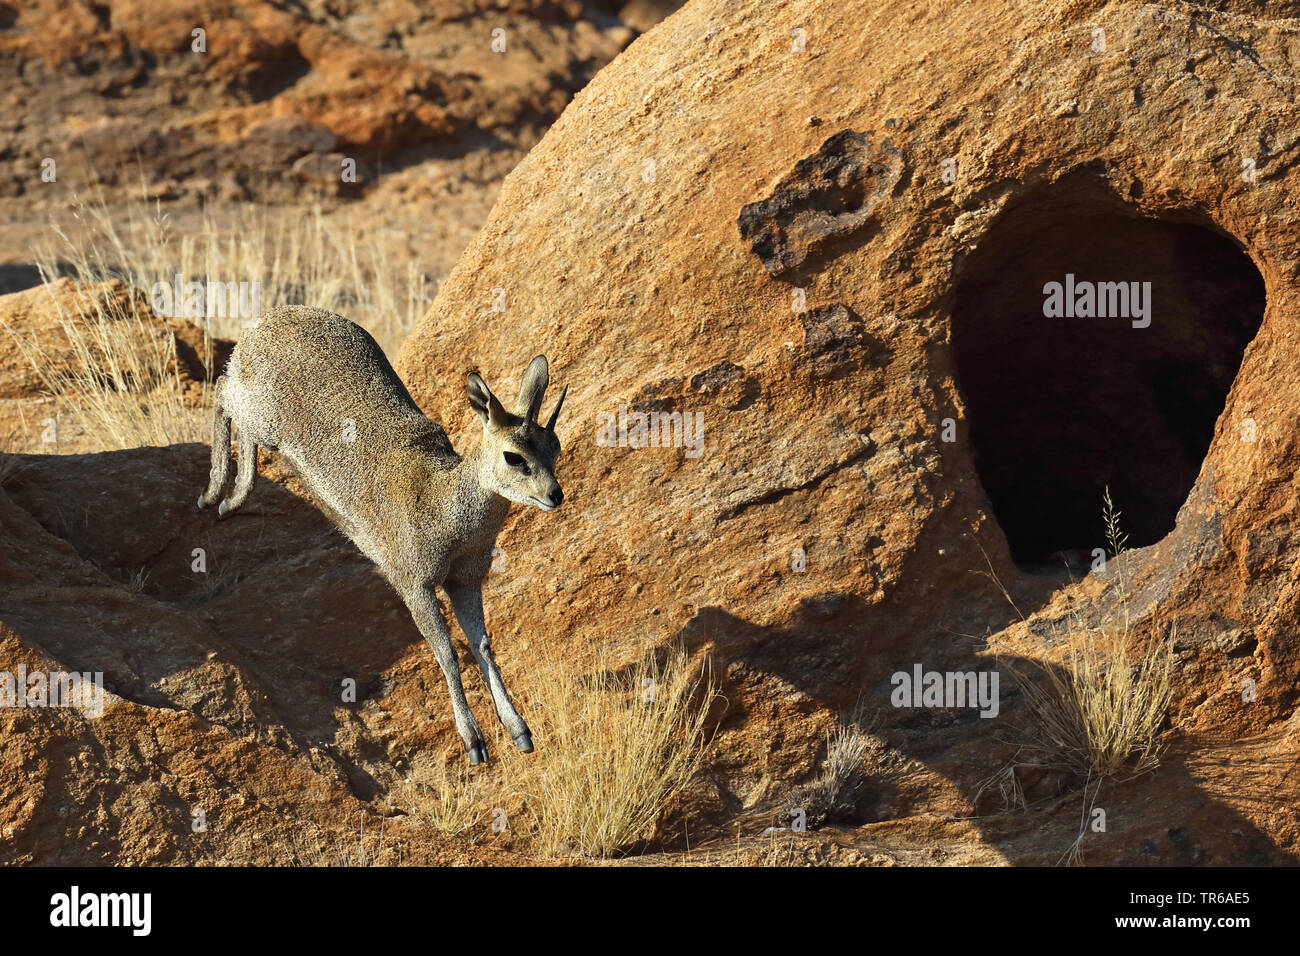 klipspringer (Oreotragus oreotragus), male jumping in the mountain range, South Africa, Augrabies Falls National Park Stock Photo